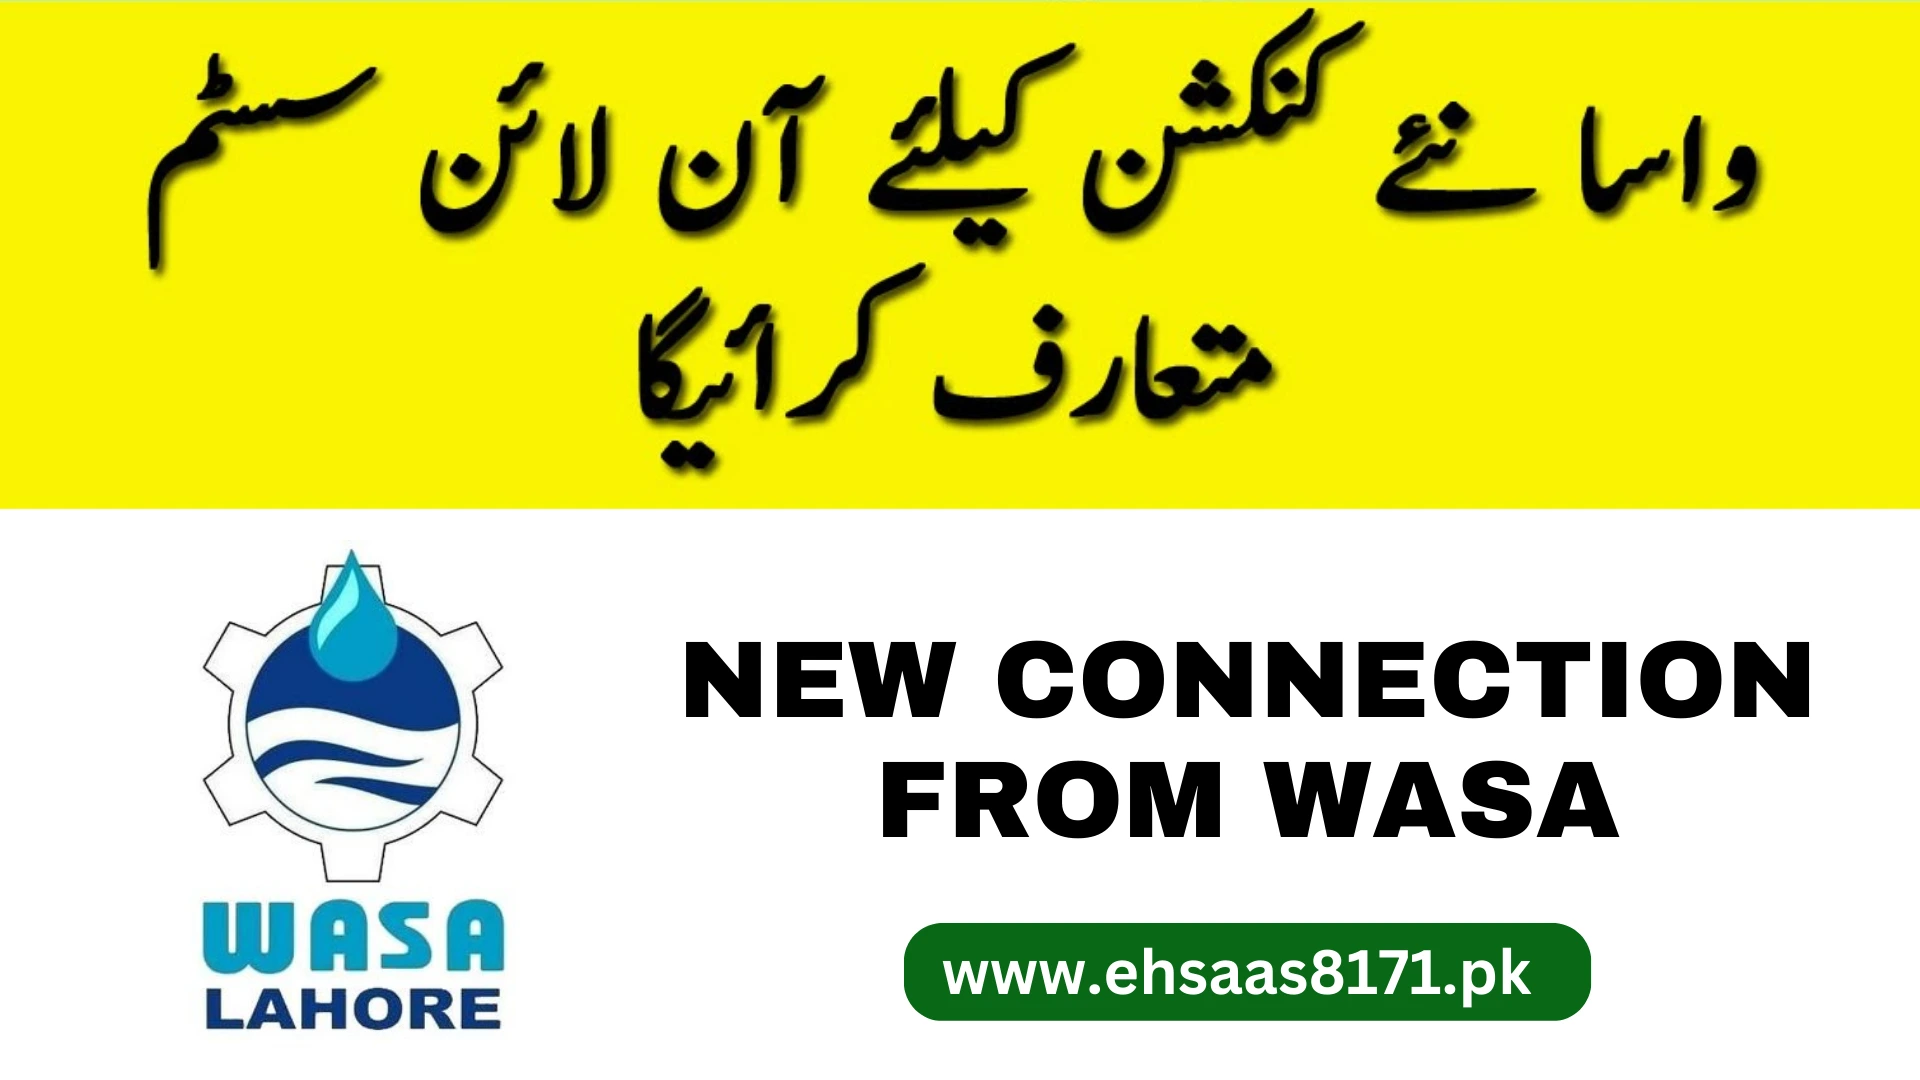 New Connection from WASA